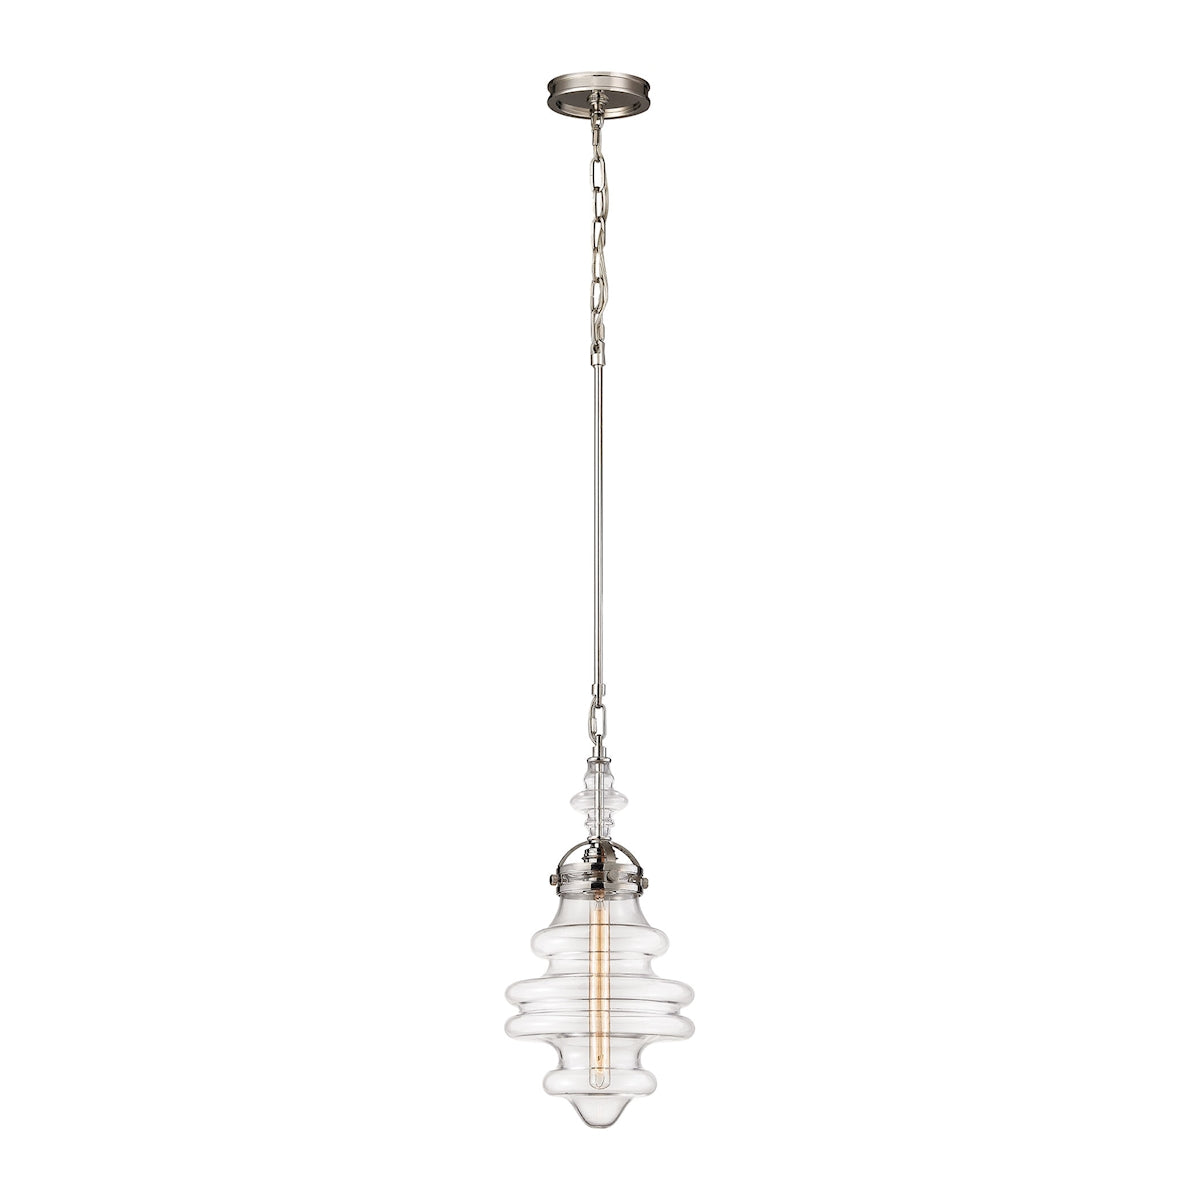 ELK Lighting 67117/1 Gramercy 1-Light Mini Pendant in Polished Nickel with Clear Glass